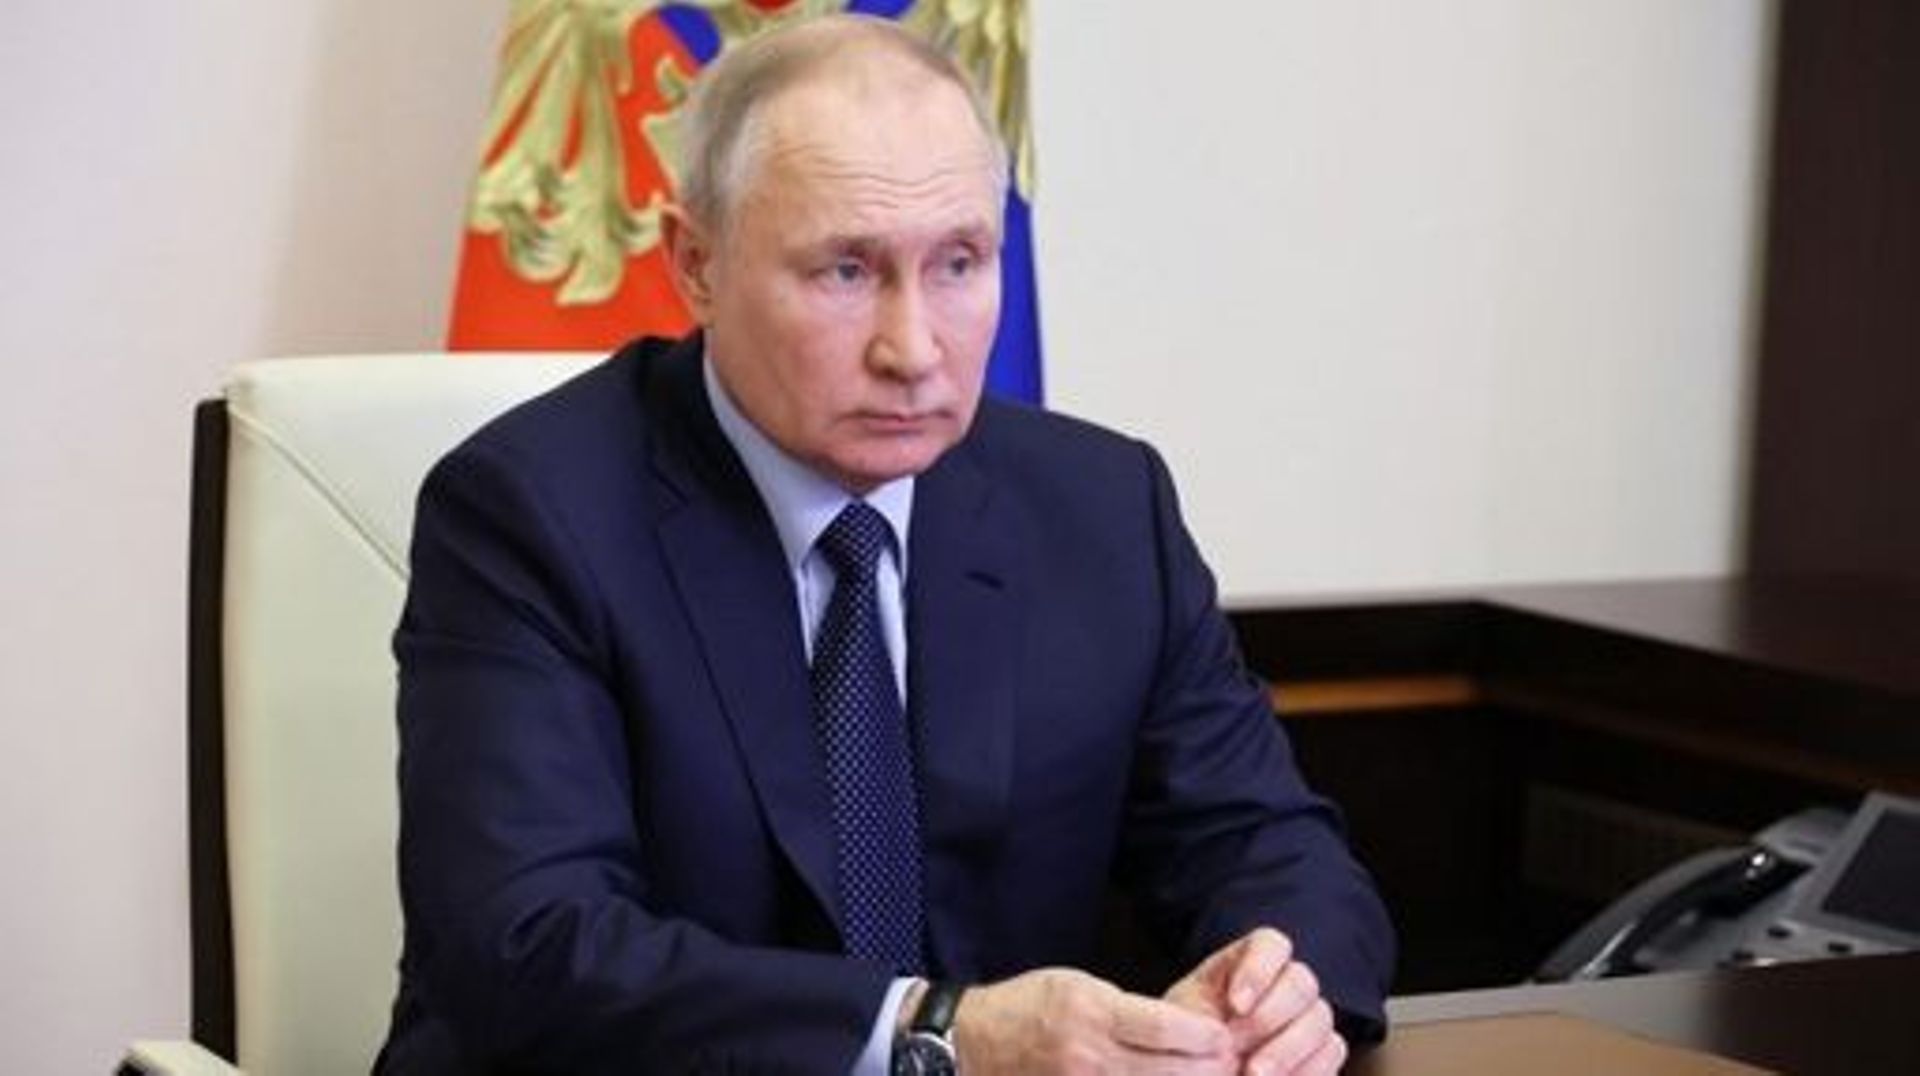 Russian President Vladimir Putin chairs a meeting on the restoration of residential infrastructure in the border areas destroyed during emergency situations, via a video conference at the Novo-Ogaryovo state residence, outside Moscow, on February 1, 2023.